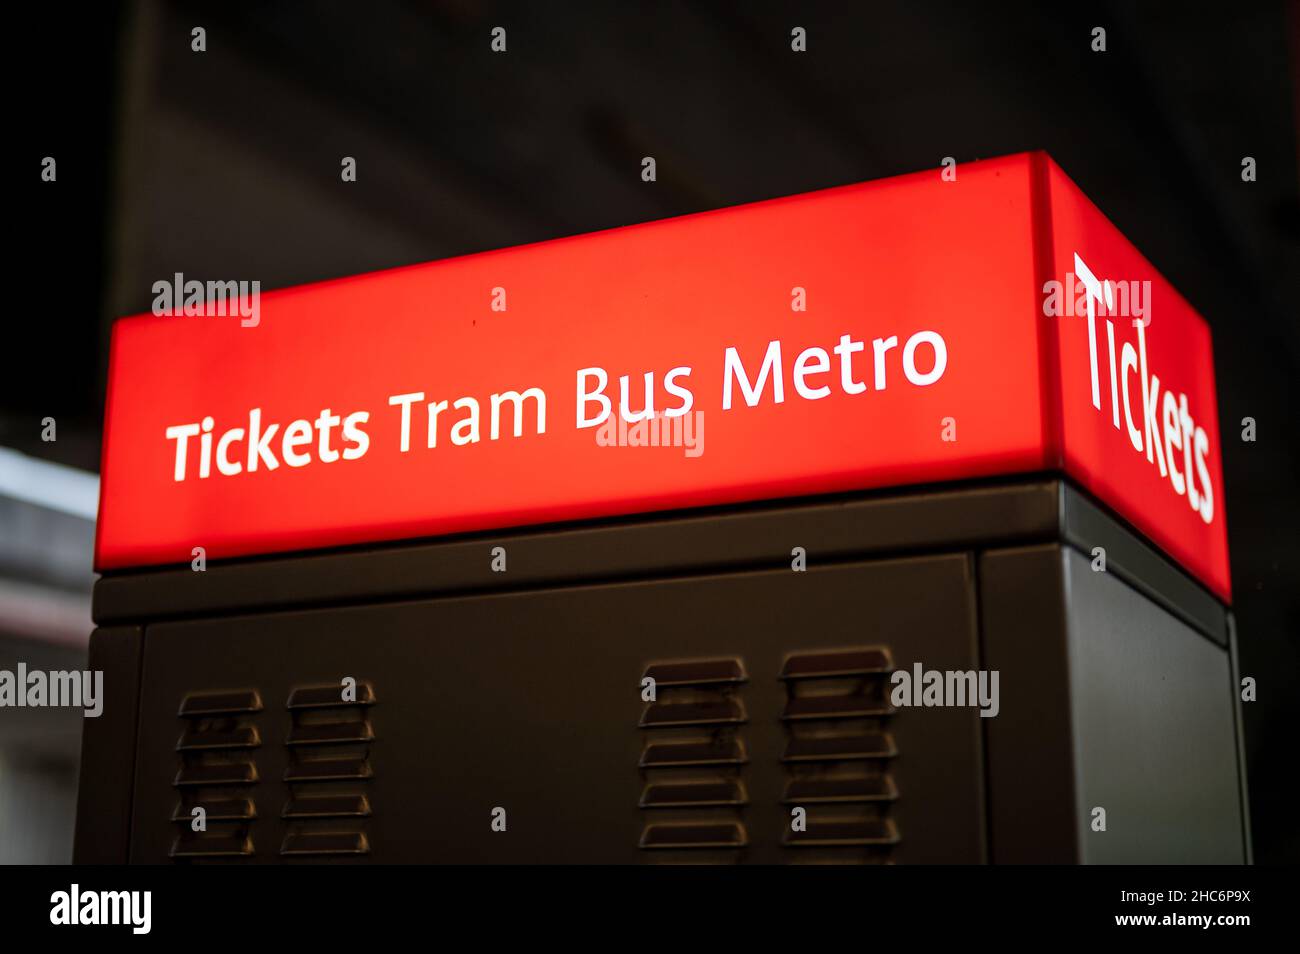 A Machine to buy tickets for public transport in Amsterdam (Tram, Bus and Metro), Netherlands Stock Photo